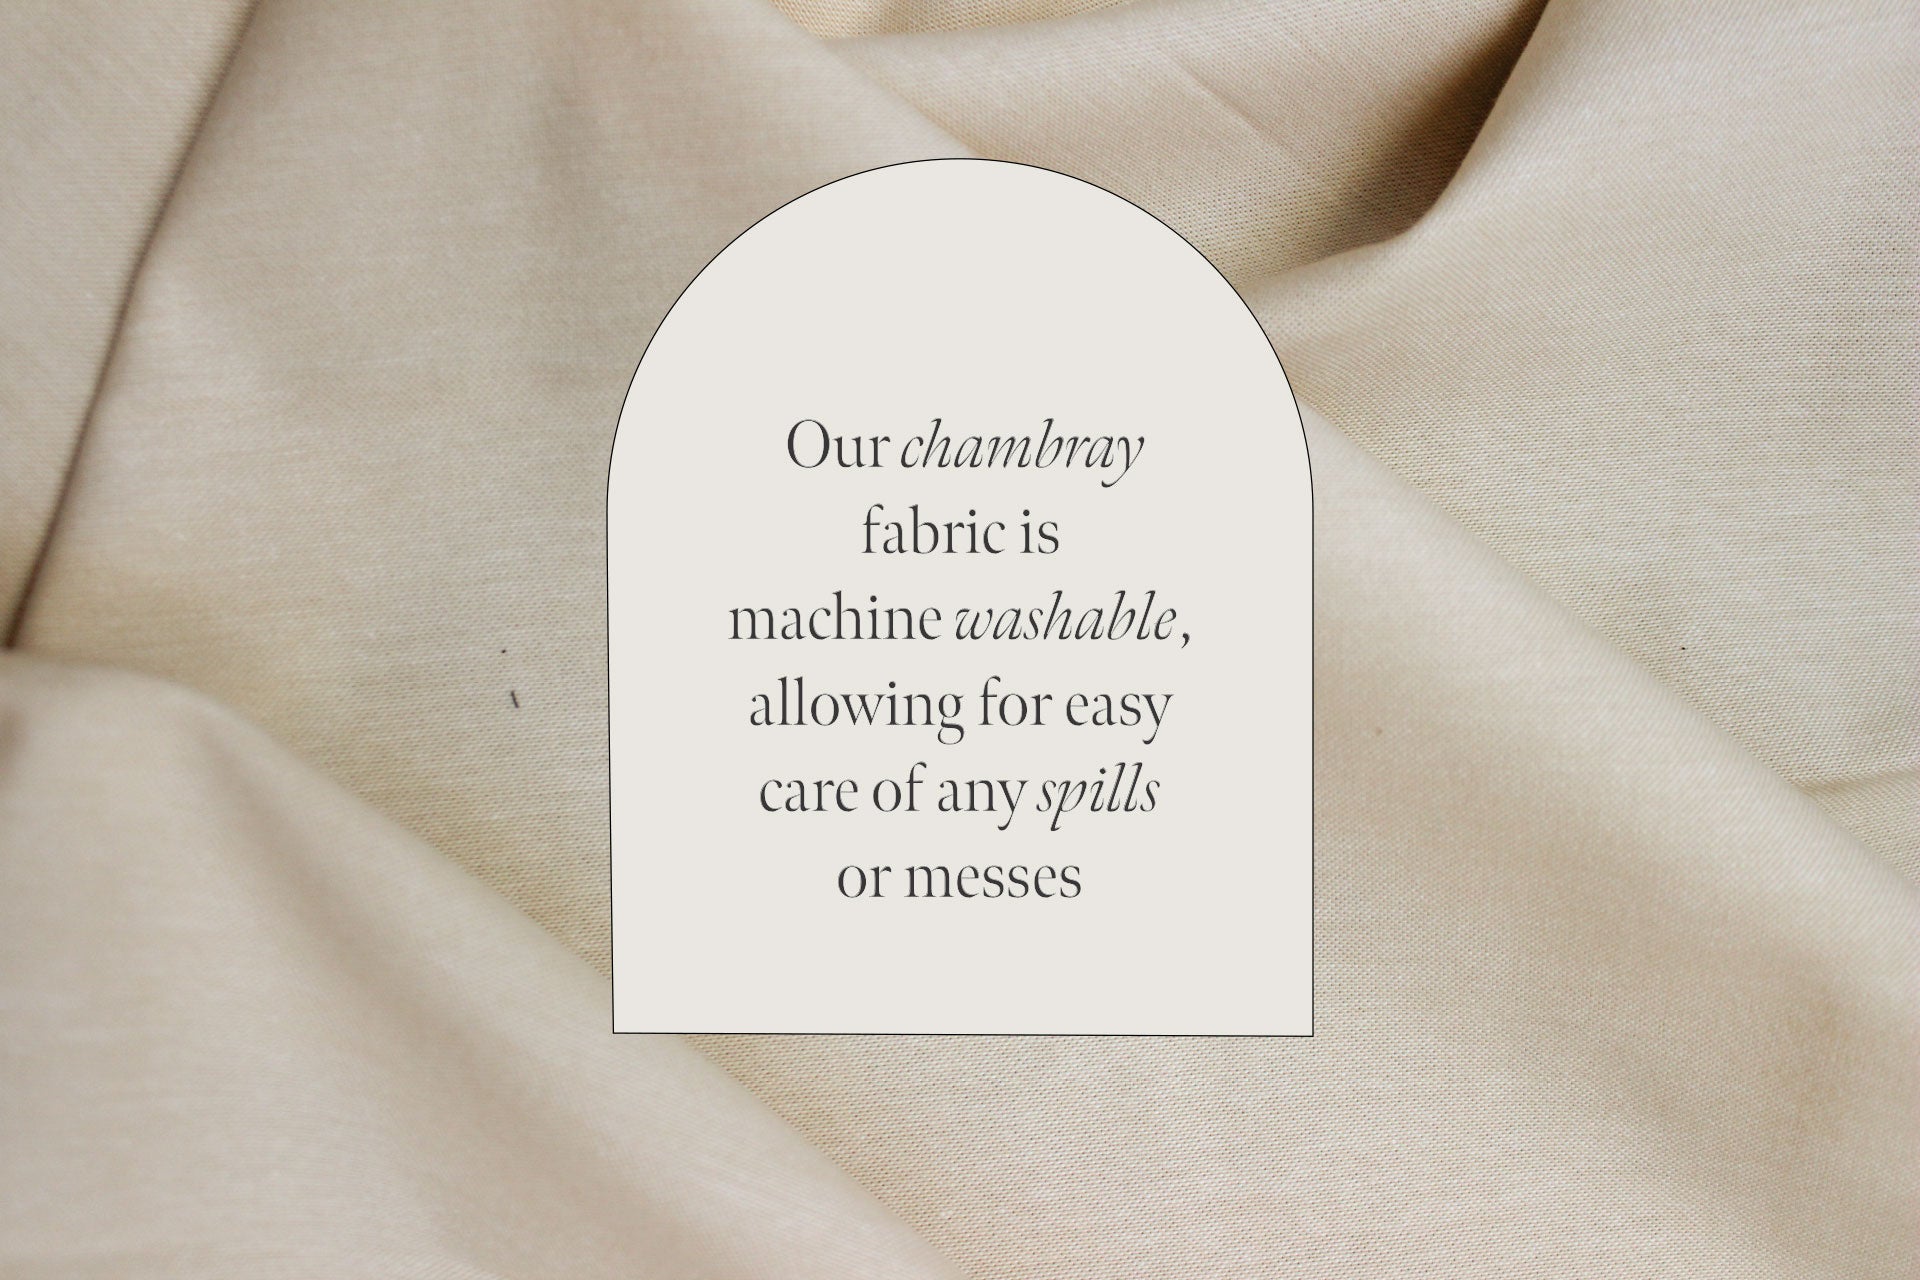 Our chambray fabric is machine washable, allowing for easy care of any spills or messes